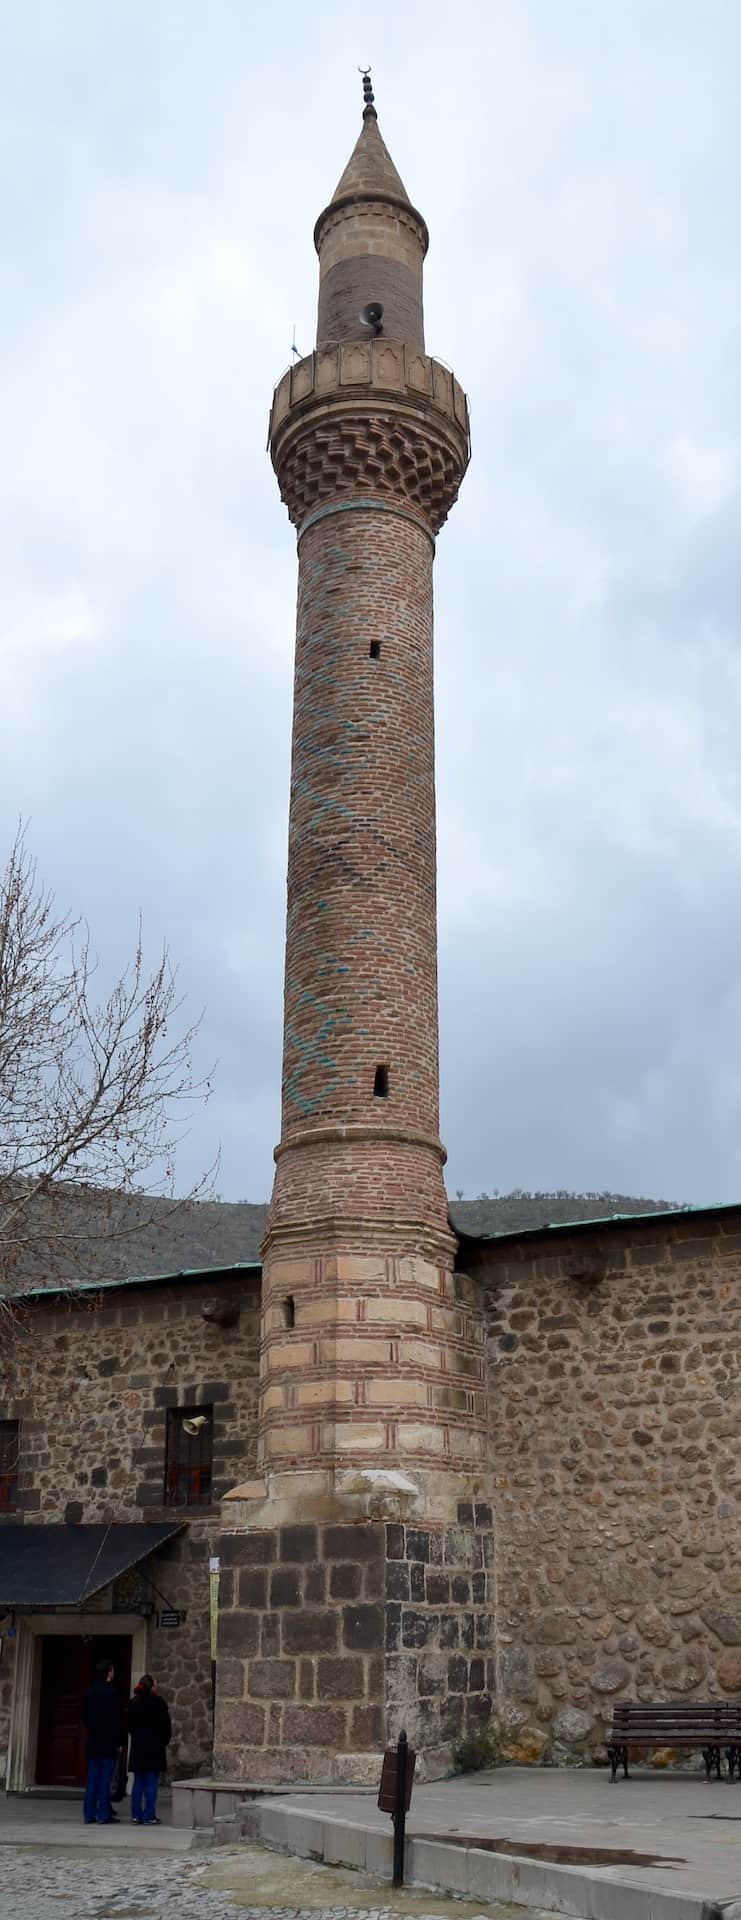 Minaret of the Great Mosque